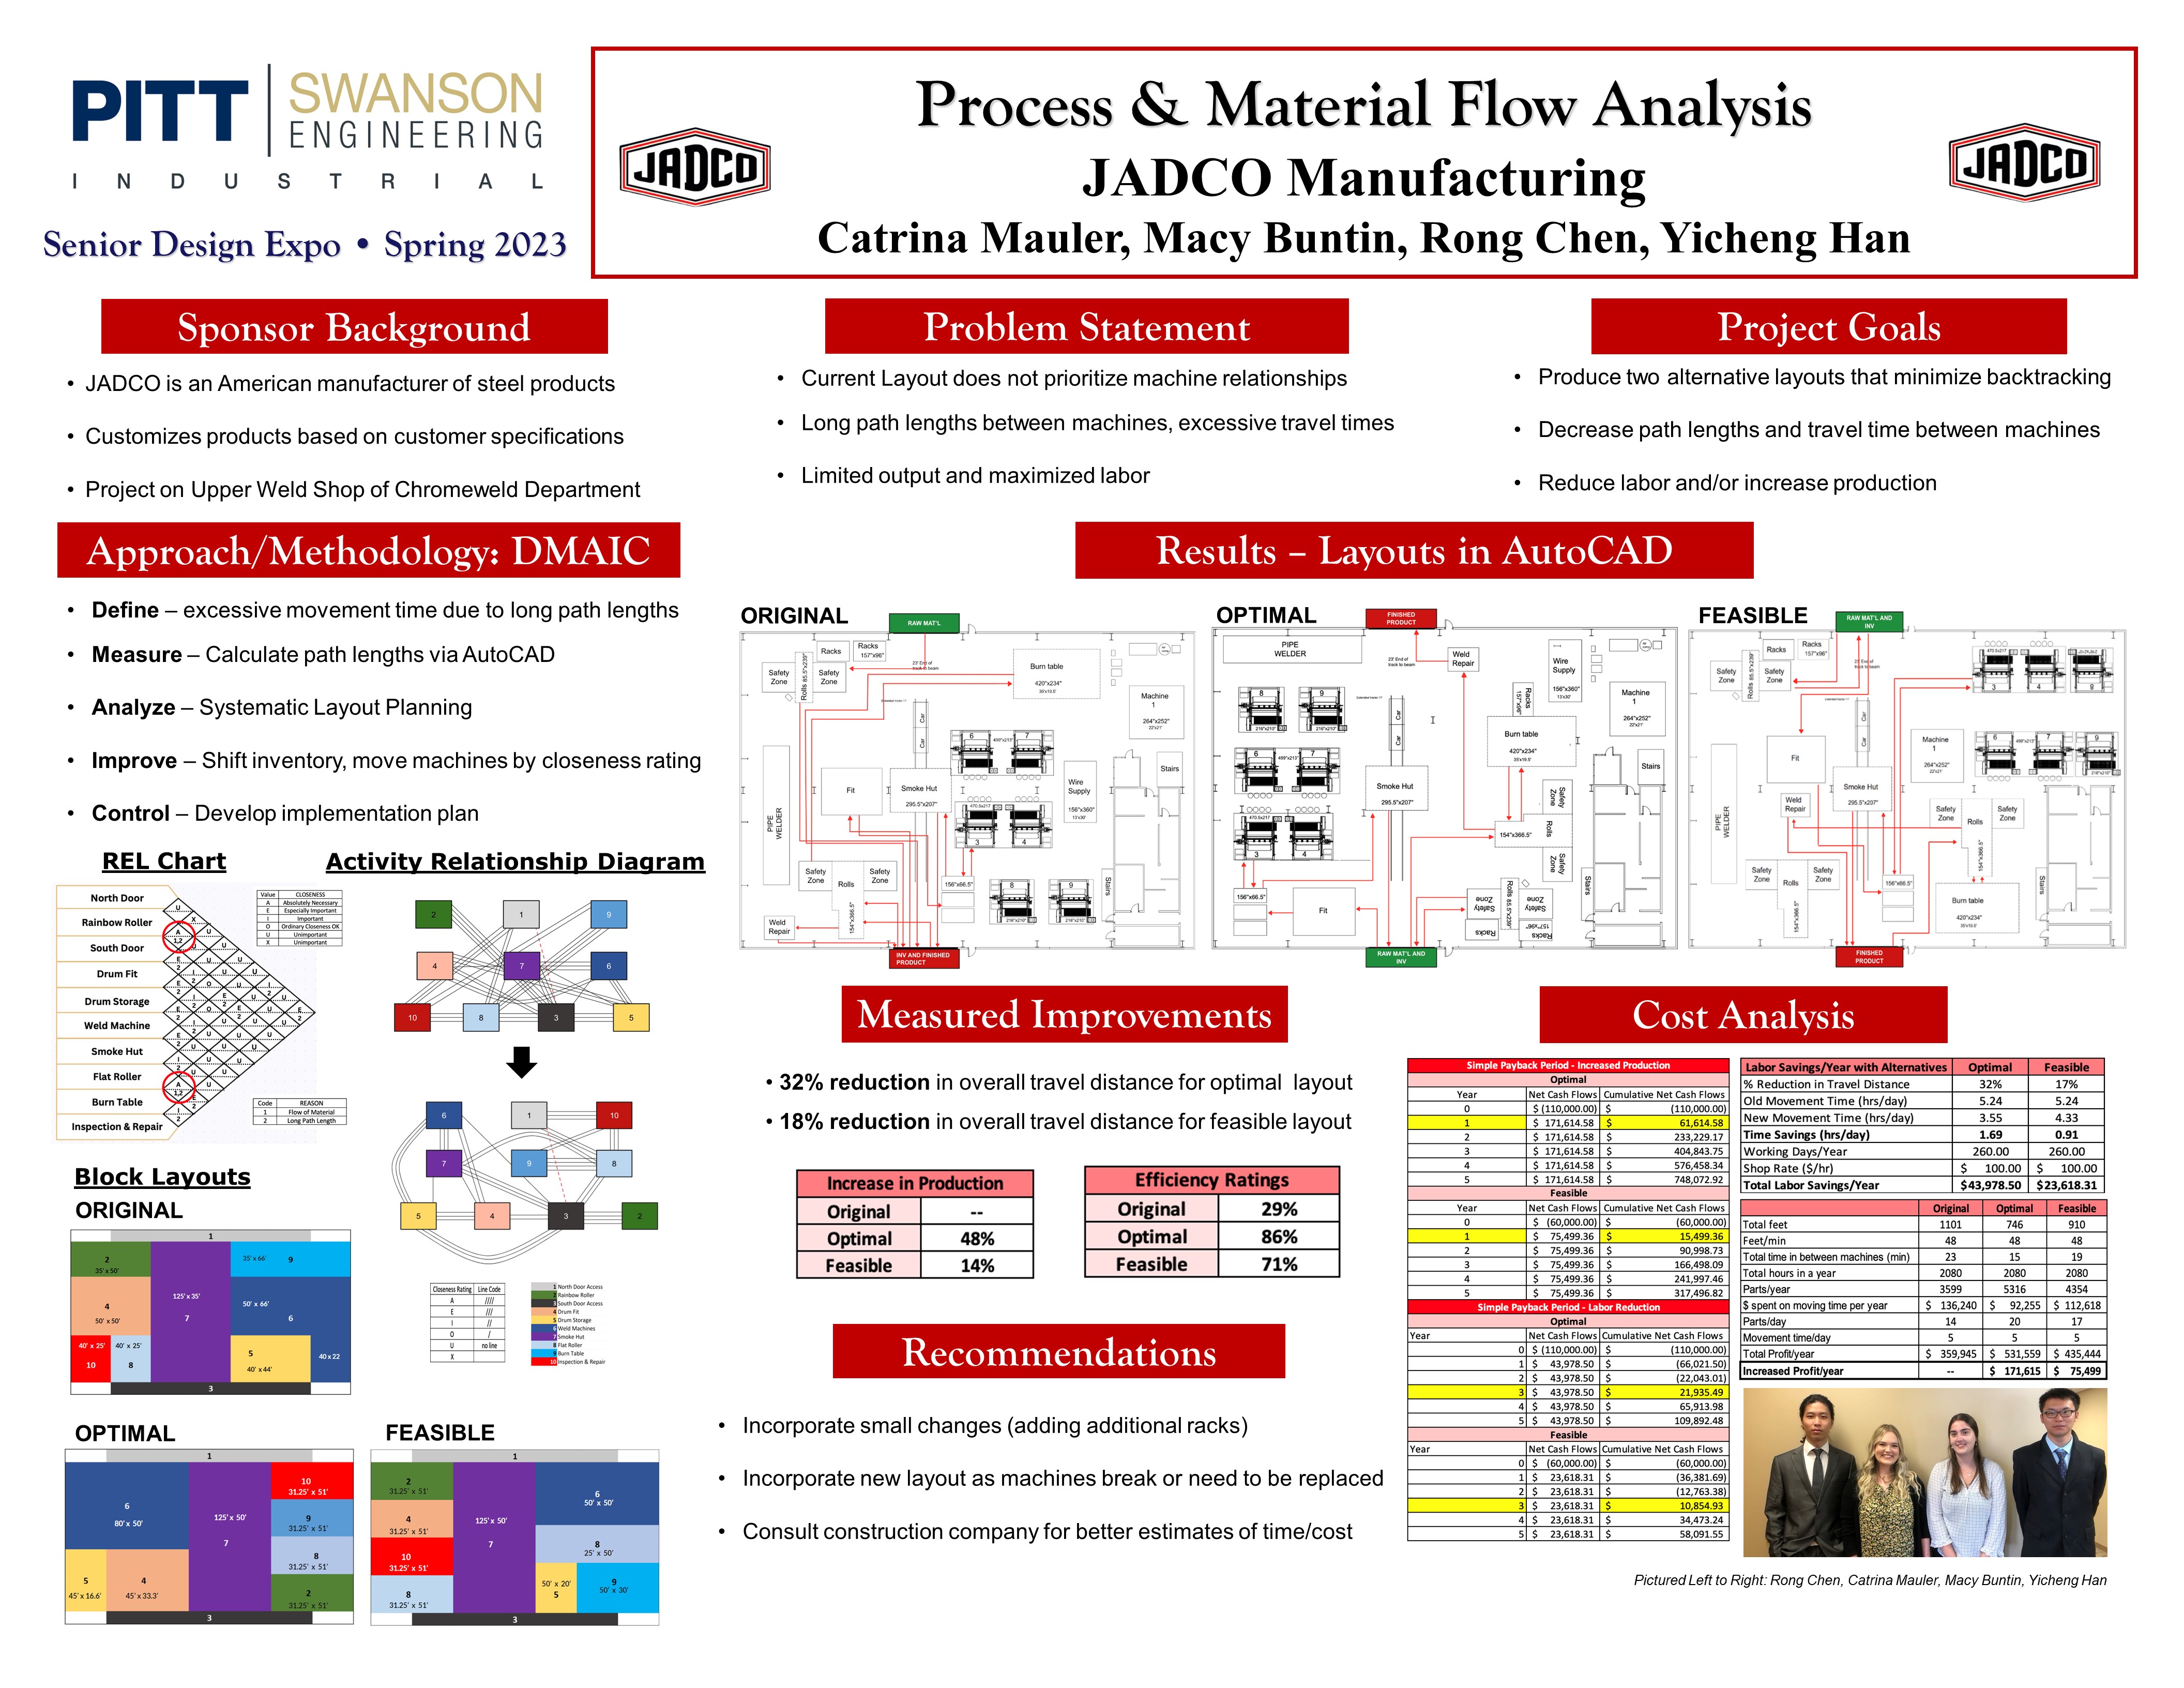 JADCO Manufactoring process and material flow analysis research poster